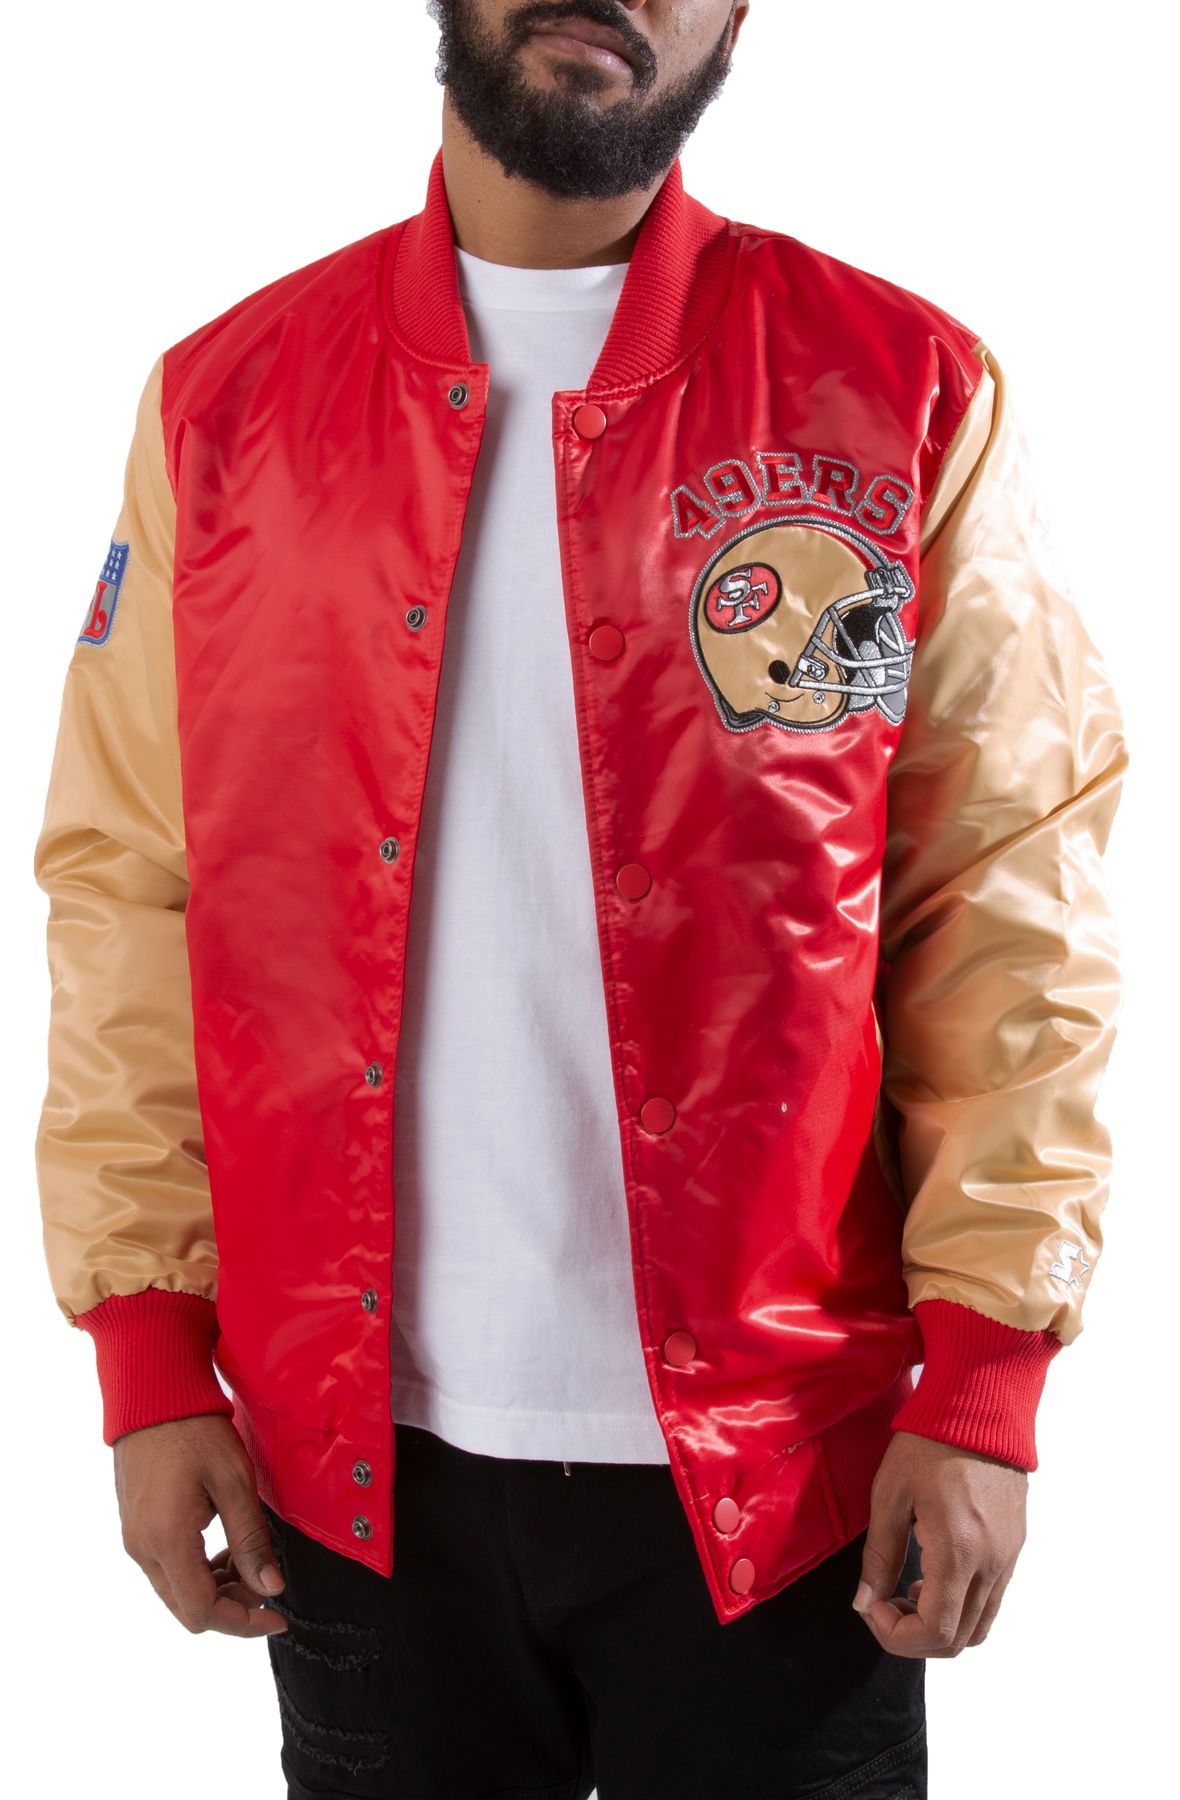 San Francisco 49ers Red and Gold Satin Jacket